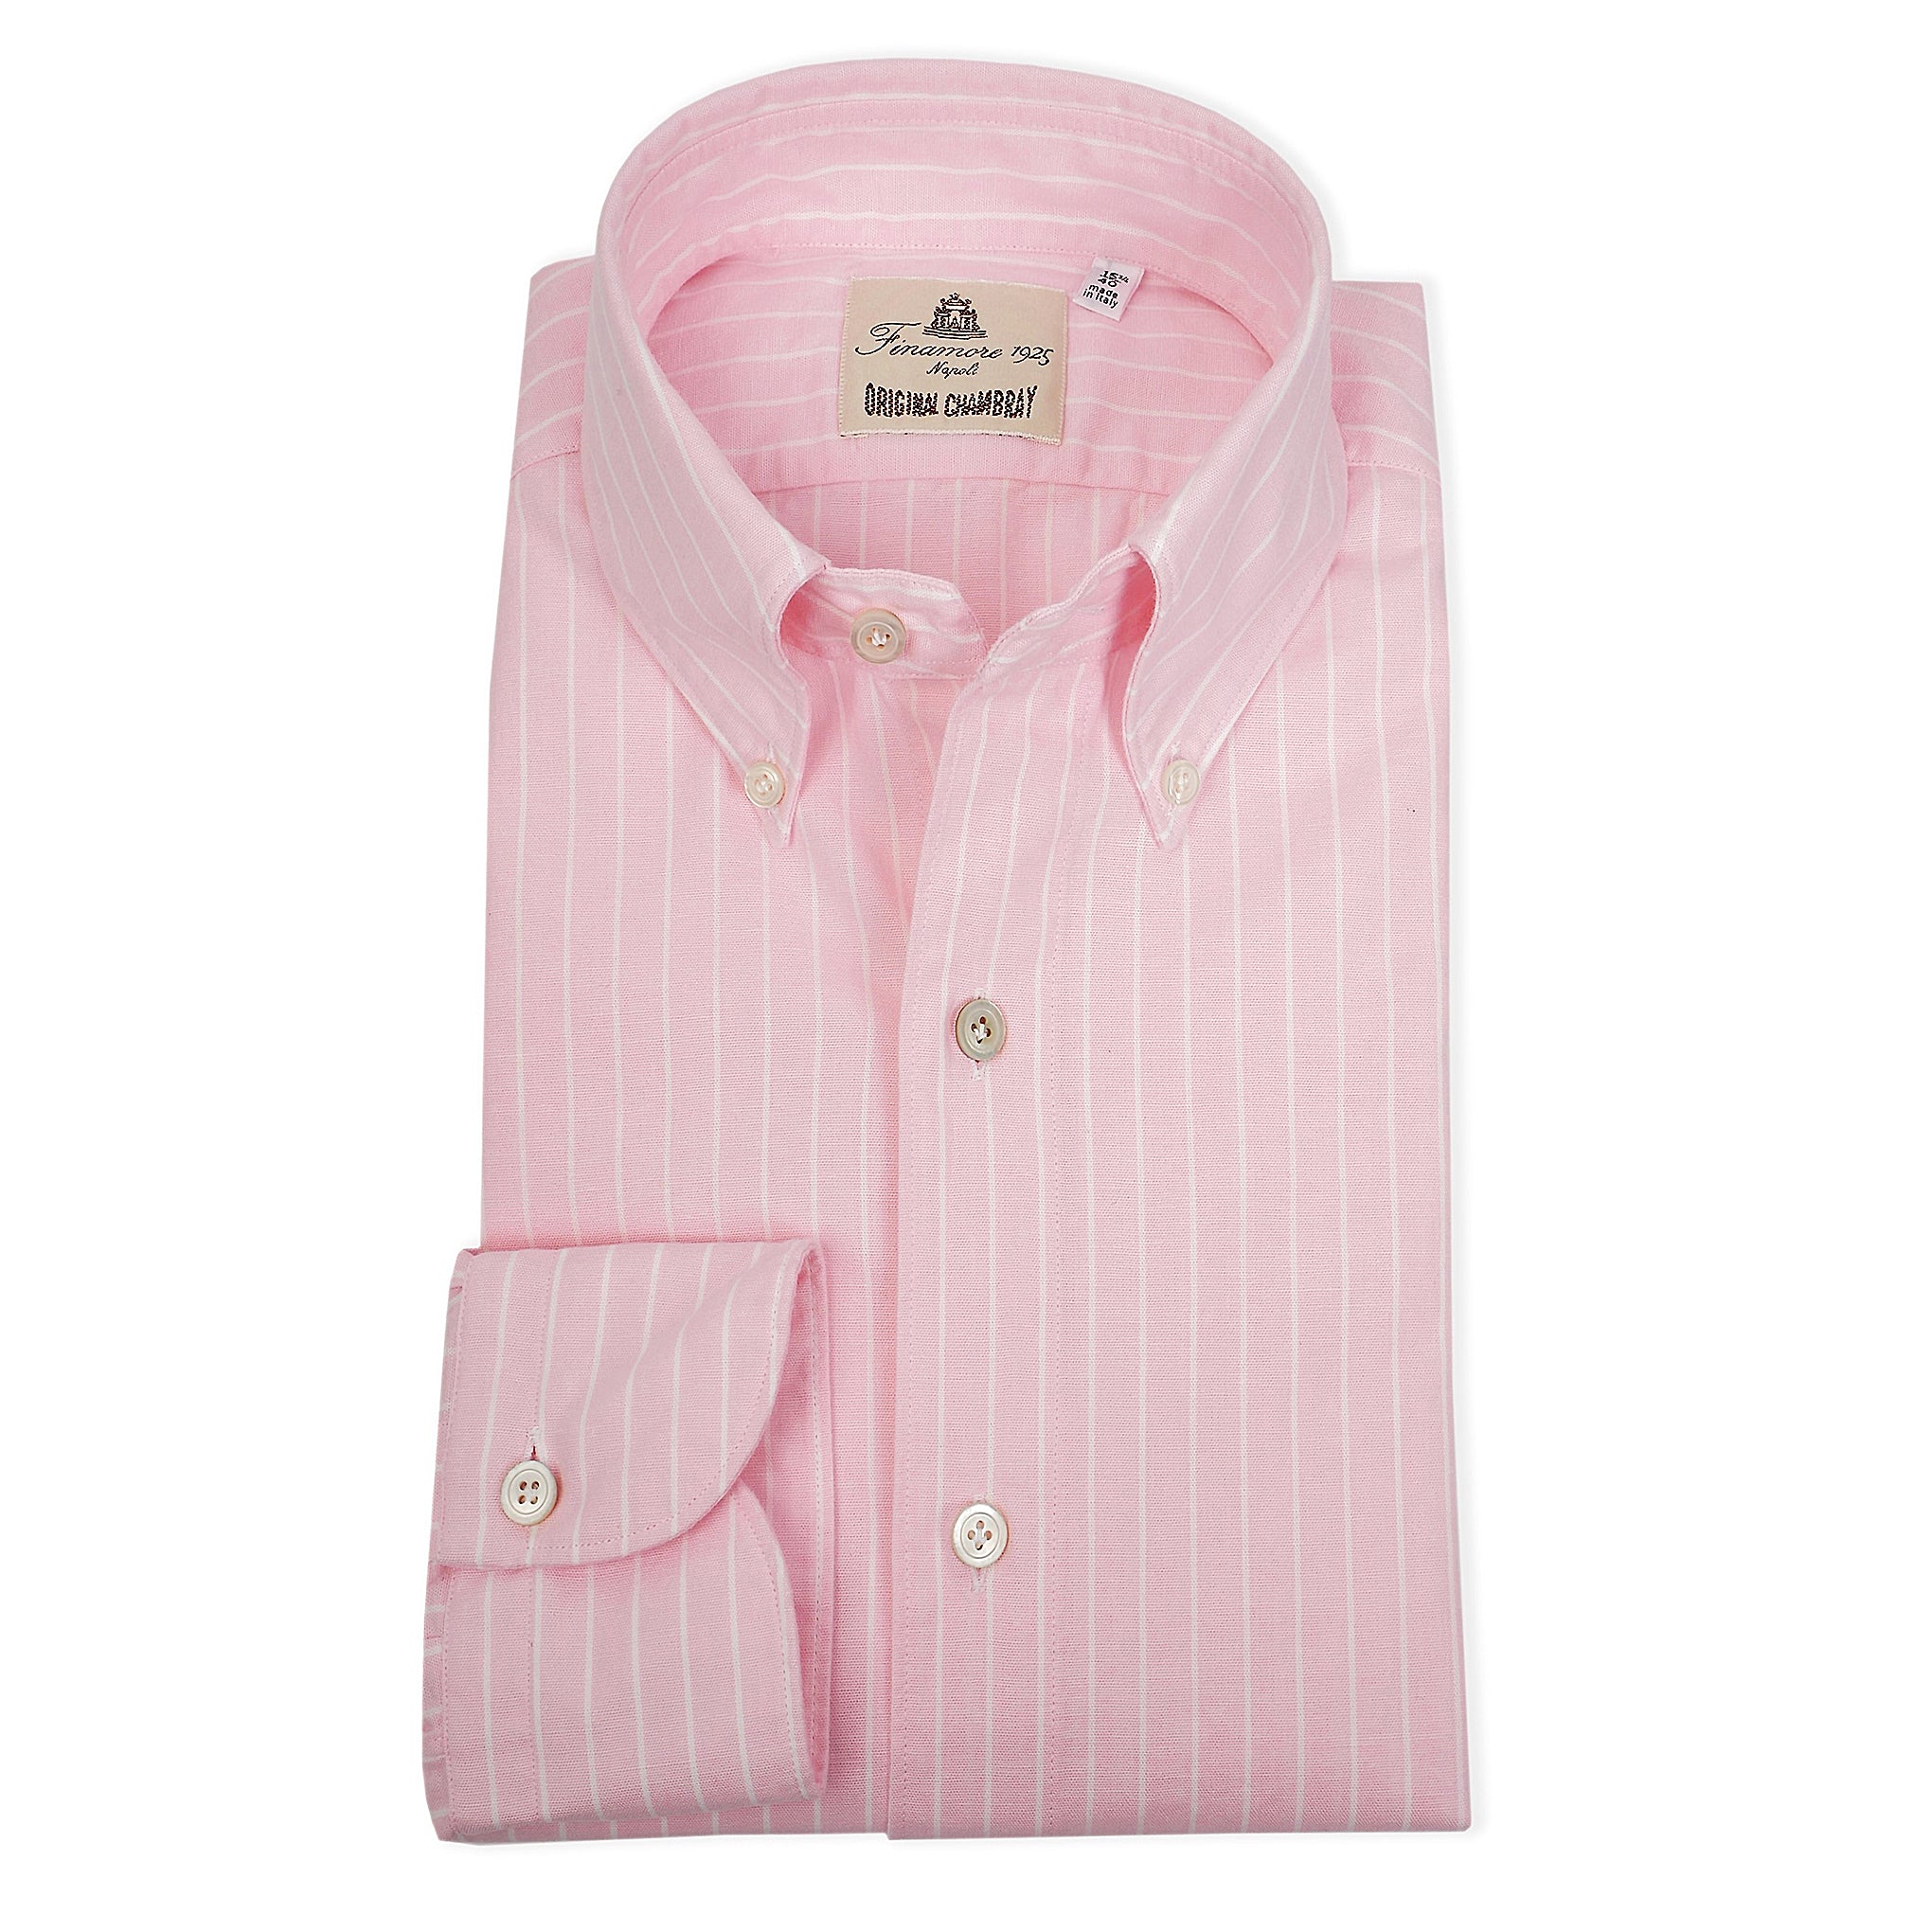 Sports shirt button-down tokyo in pink pinstriped chambray. Finamore 1925